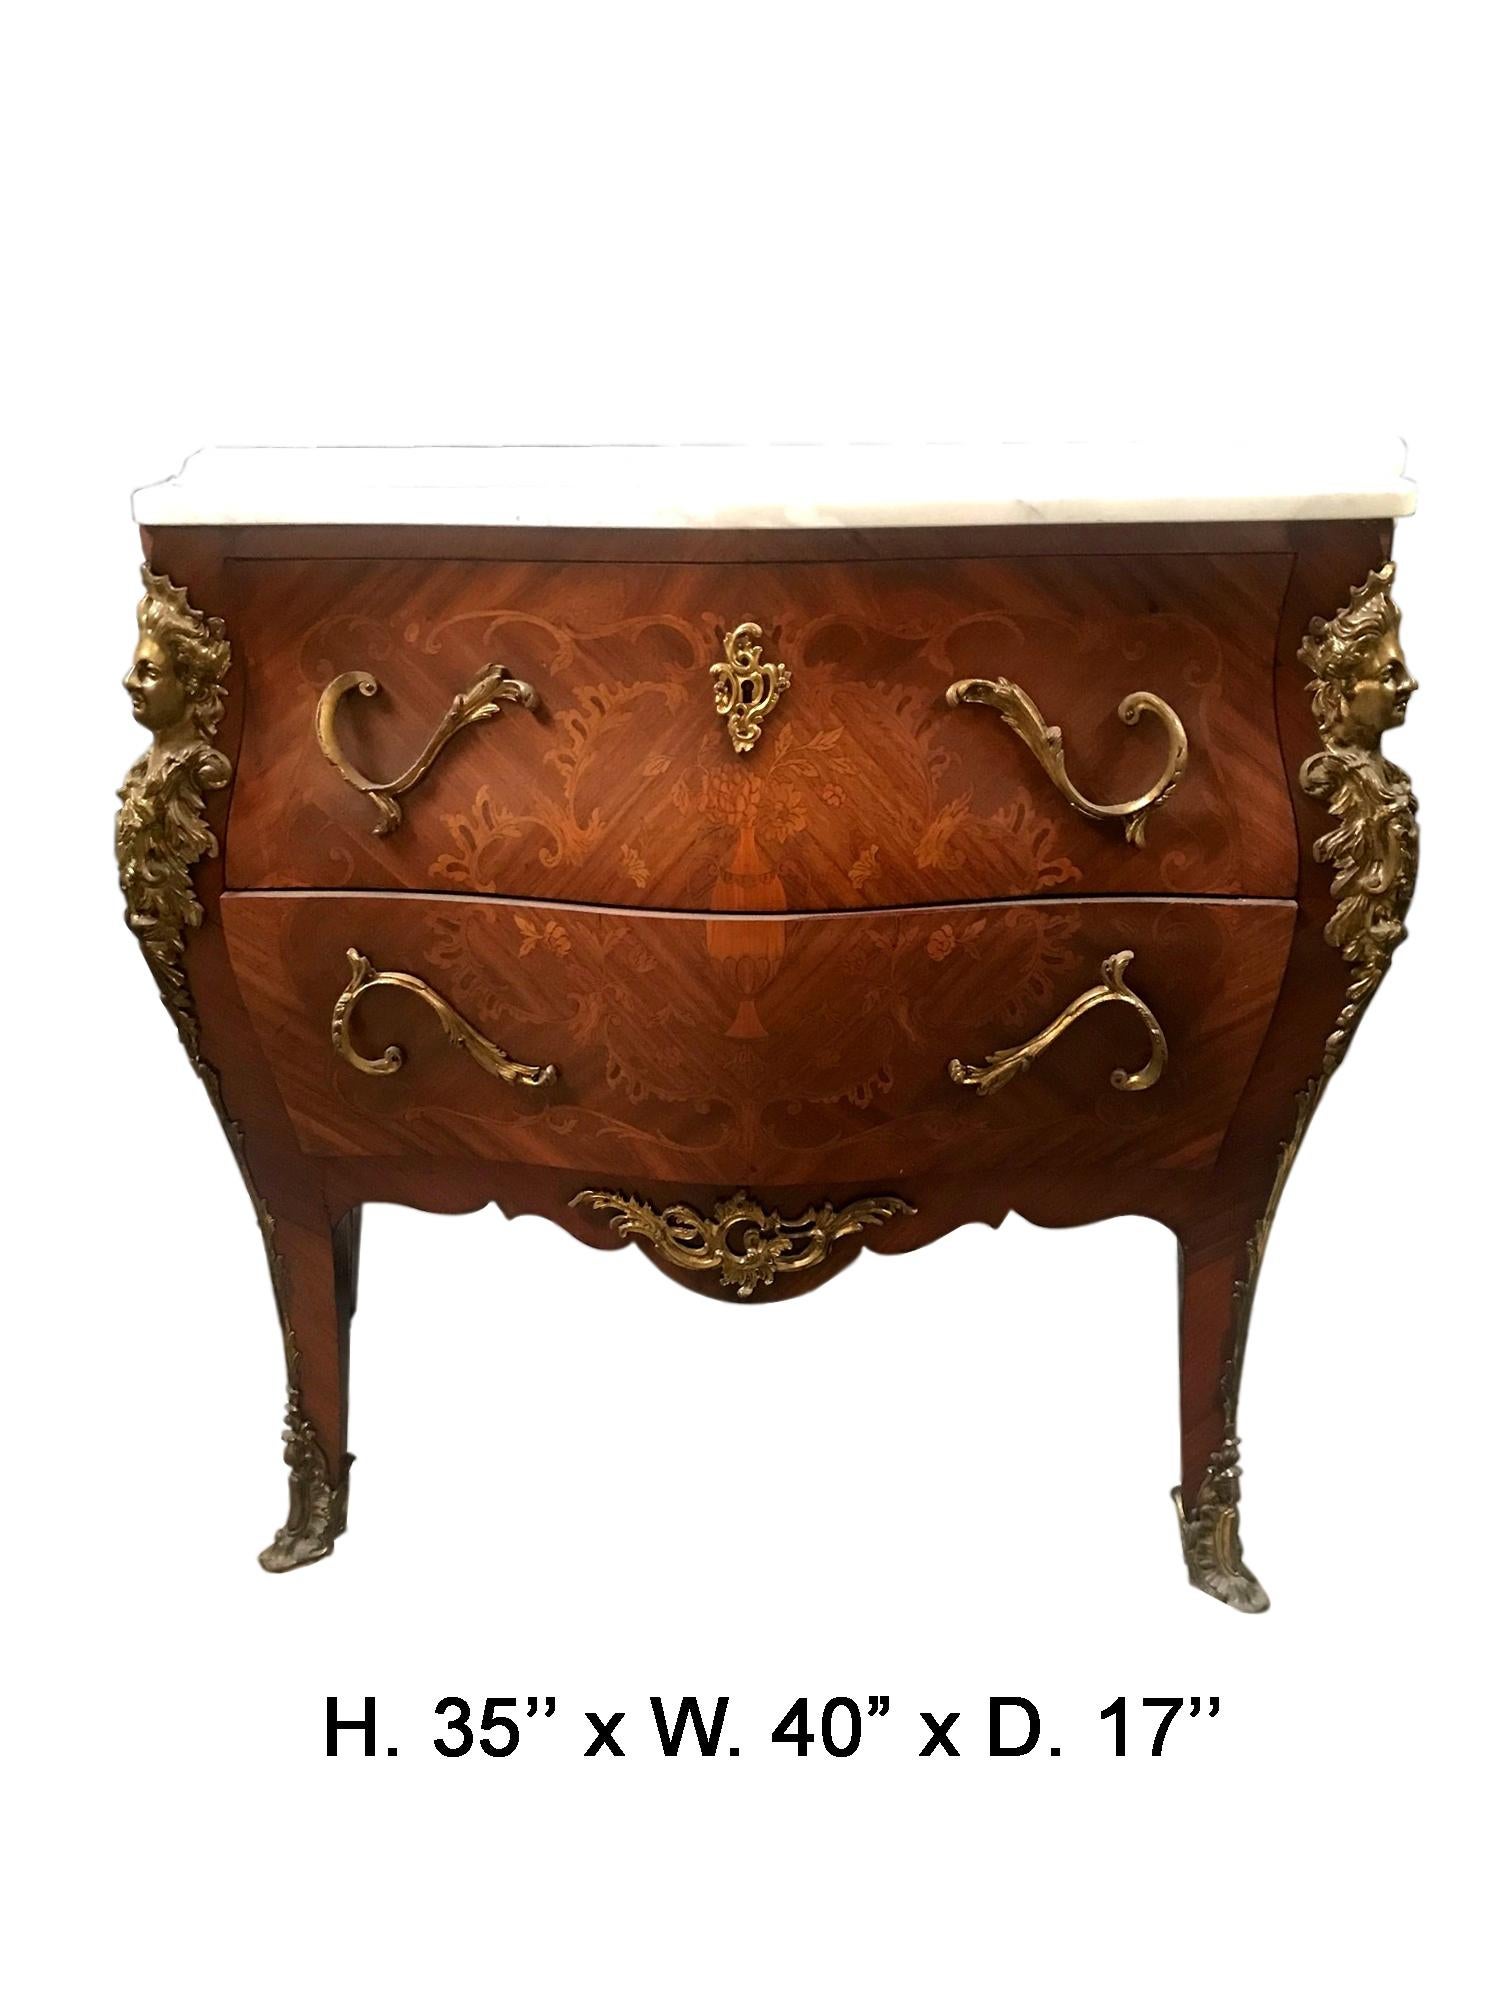 Lovely French Louis XV style bombe marquetry commode, 19th century. 
A shaped white marble top rests over two large drawers decorated in foliate motif marquetry, mounted with unique foliate decorated ormolu handles and escutcheons, each corner